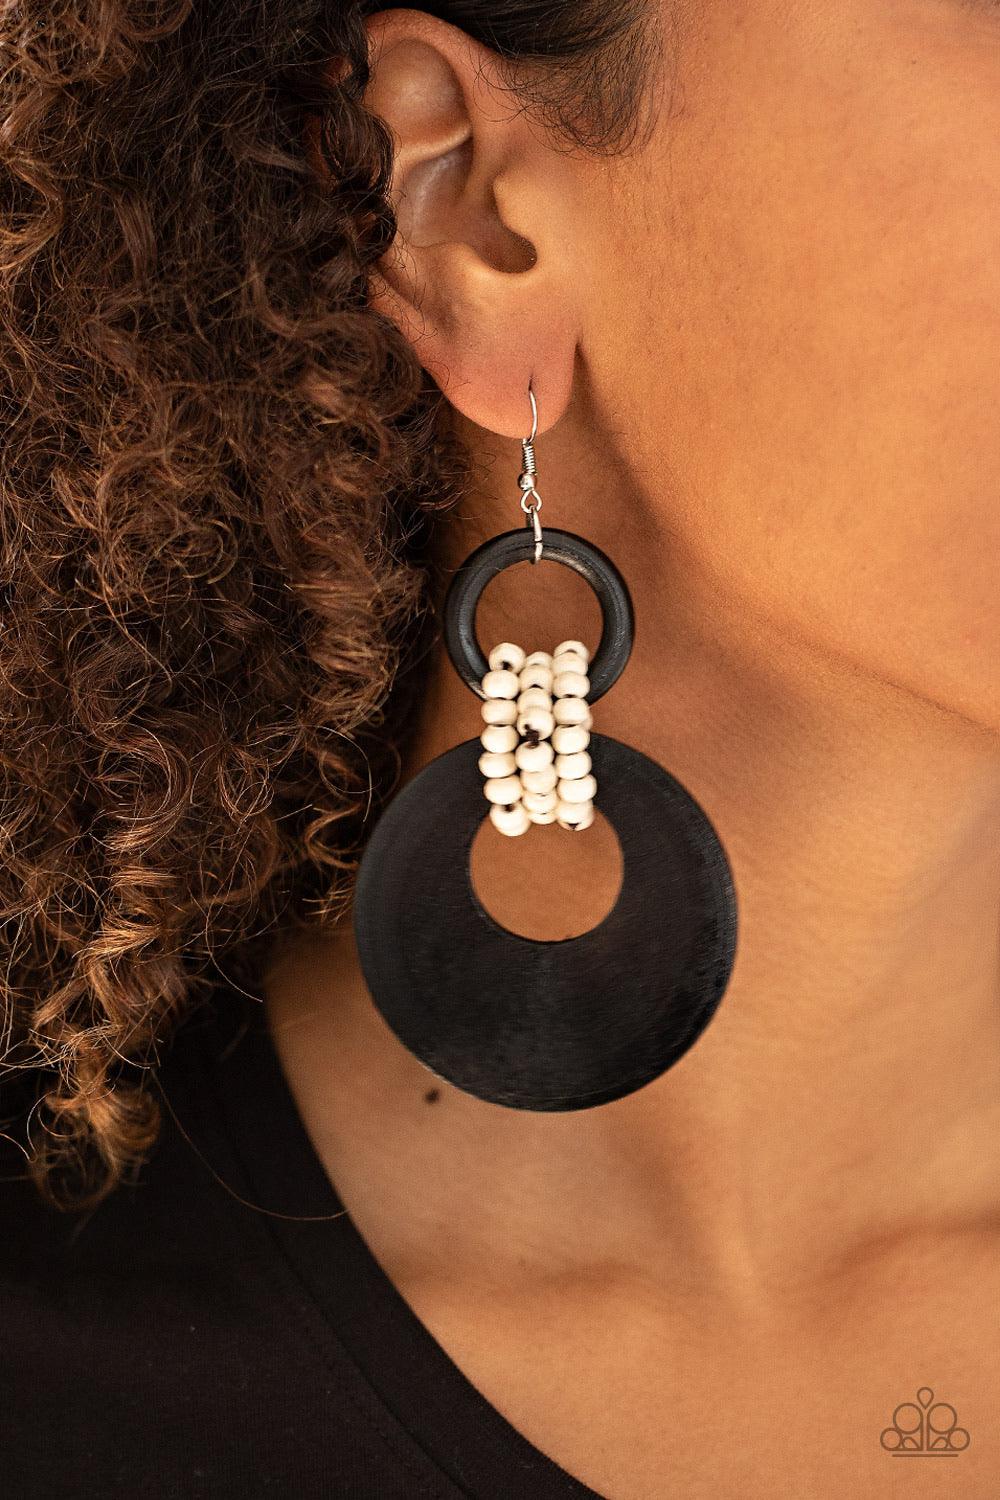 Paparazzi Accessories Beach Day Drama - Black White wooden beaded links connect together a black wooden ring and an oversized black wooden crescent-like hoop, creating a uniquely earthy lure. Earring attaches to a standard fishhook fitting. Sold as one pa